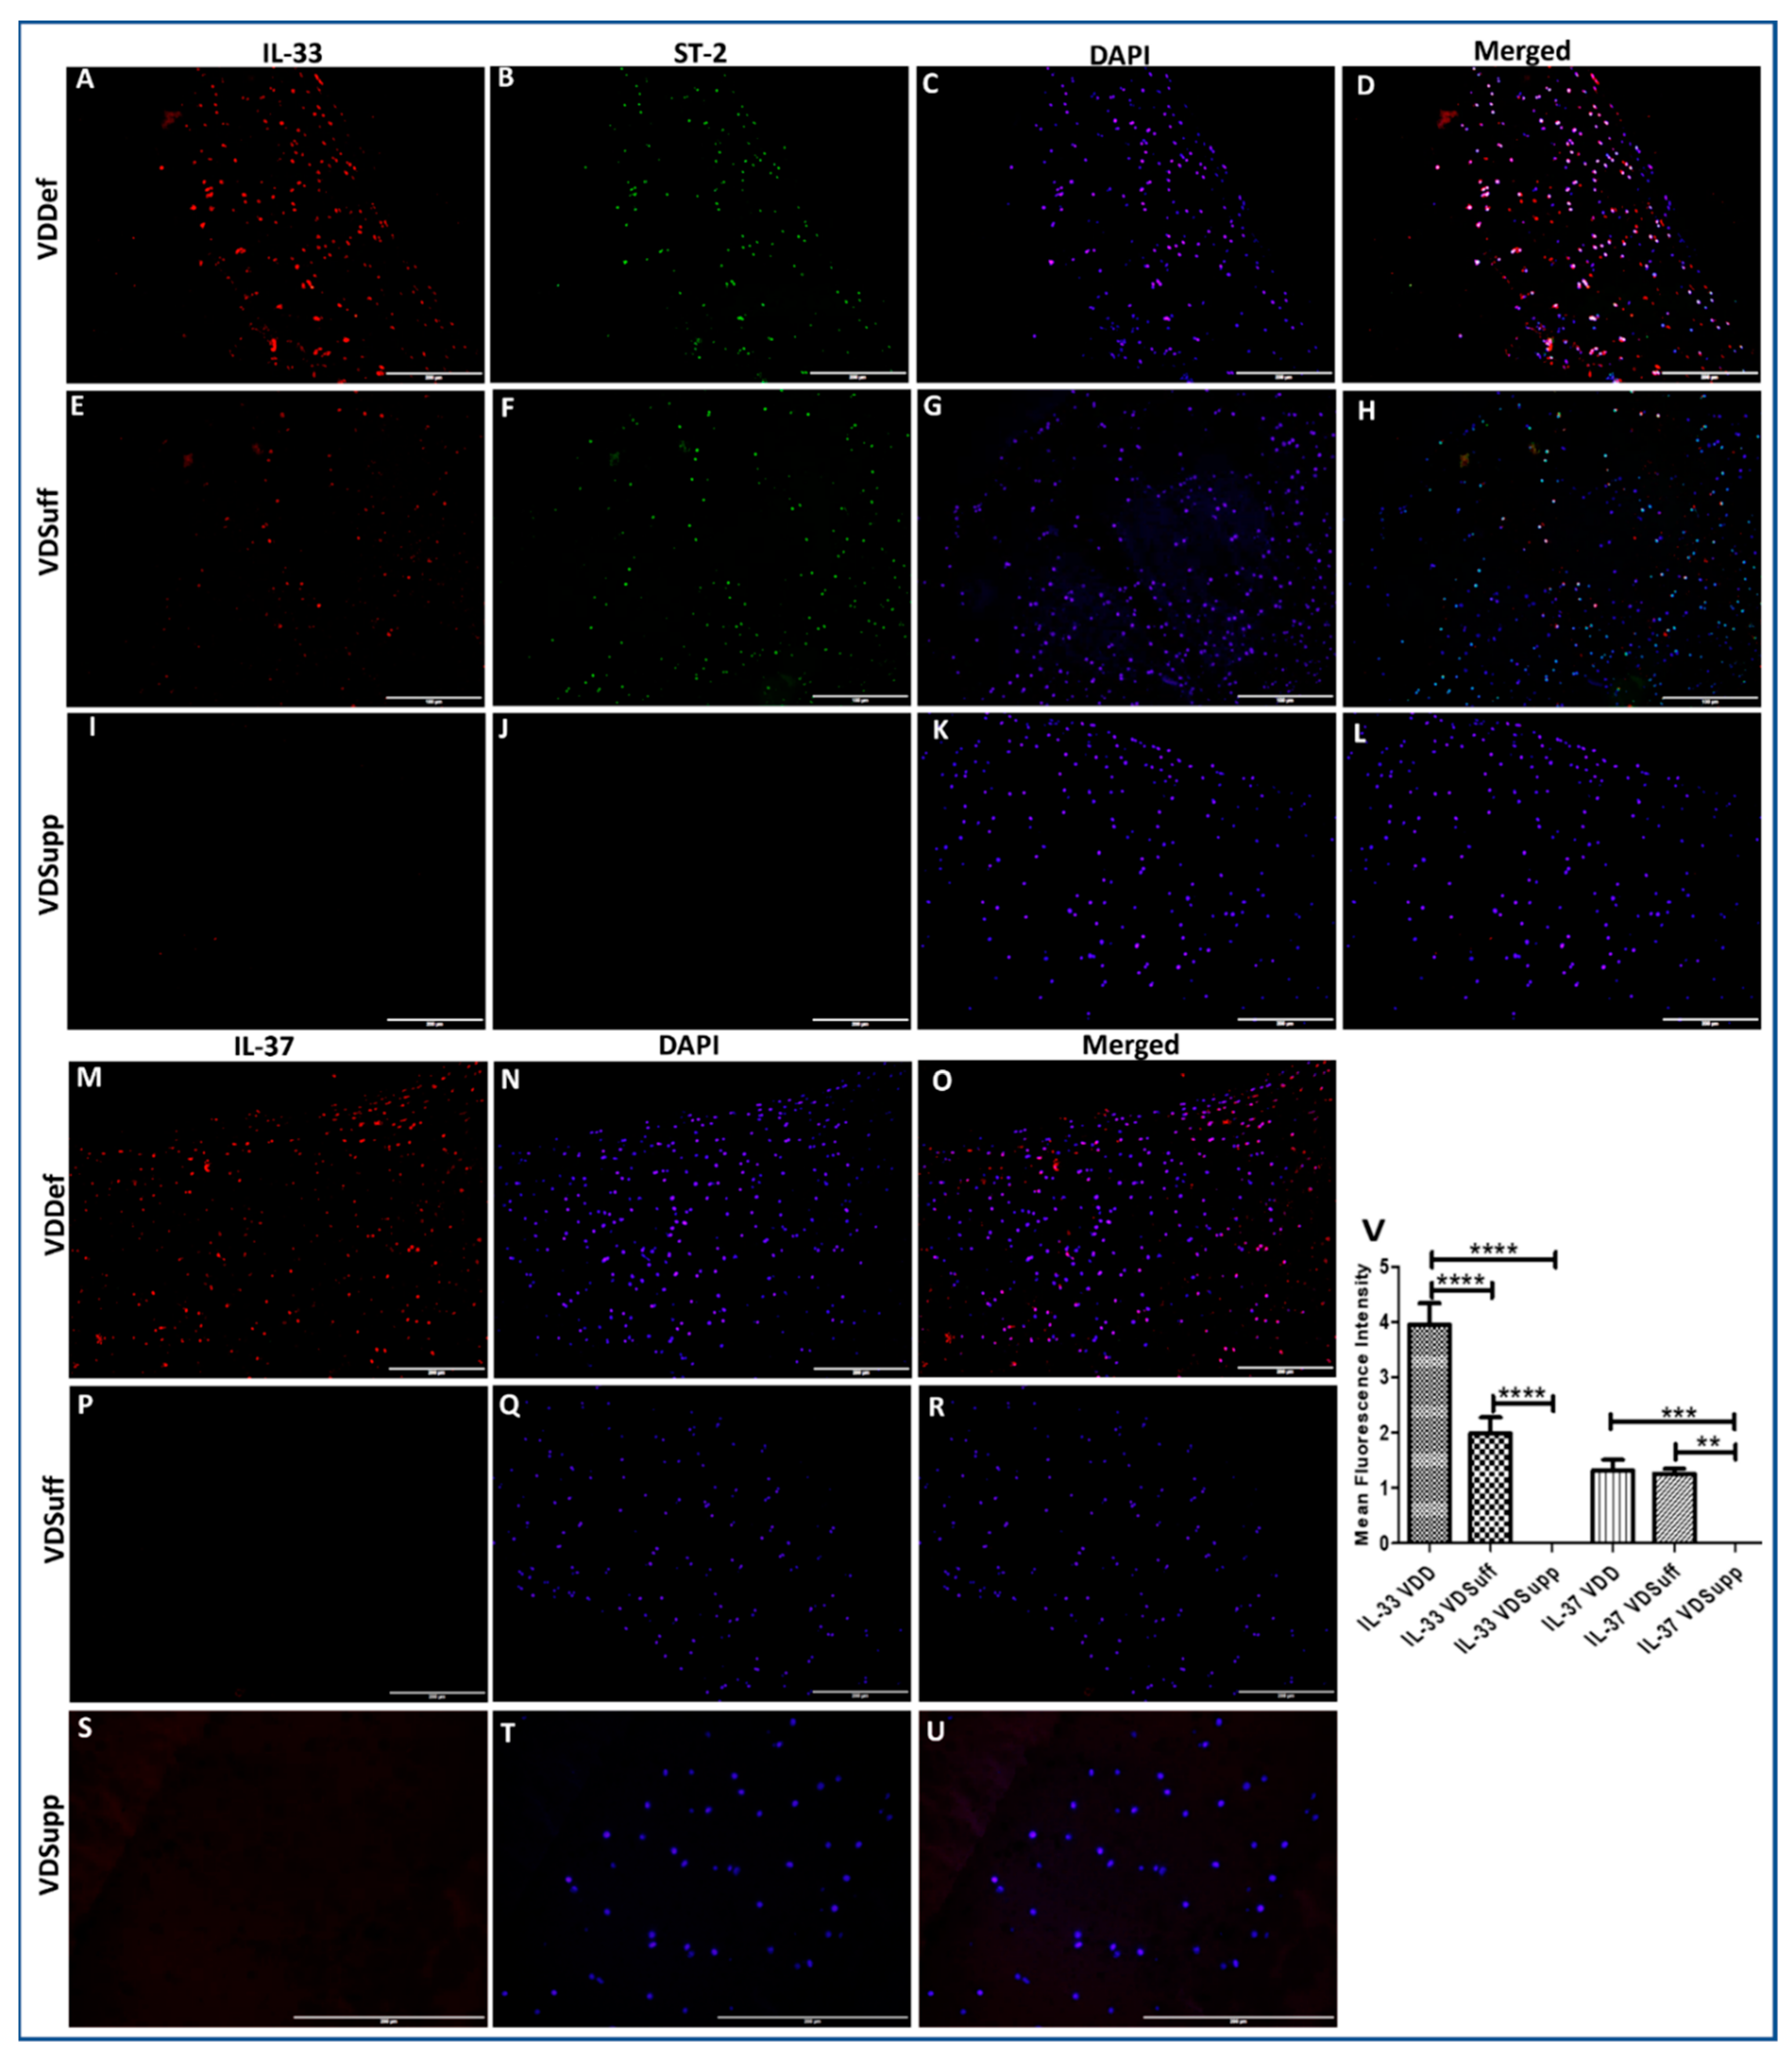 Antibodies Free Full Text Il 33 Il 37 And Vitamin D Interaction Mediate Immunomodulation Of Inflammation In Degenerating Cartilage Html